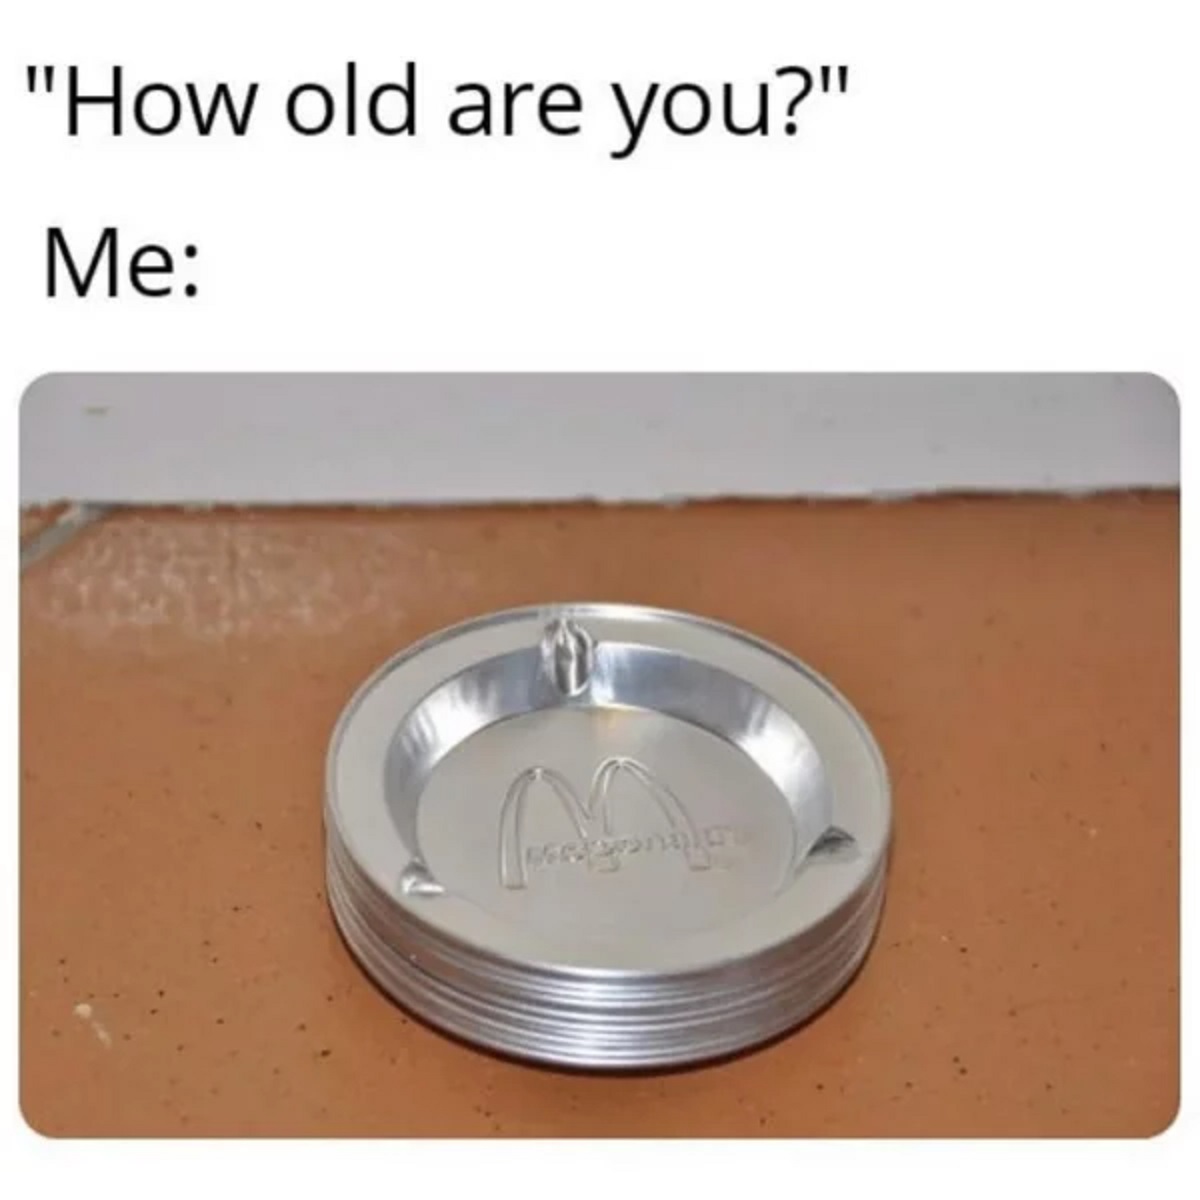 go on without me meme - "How old are you?" Me